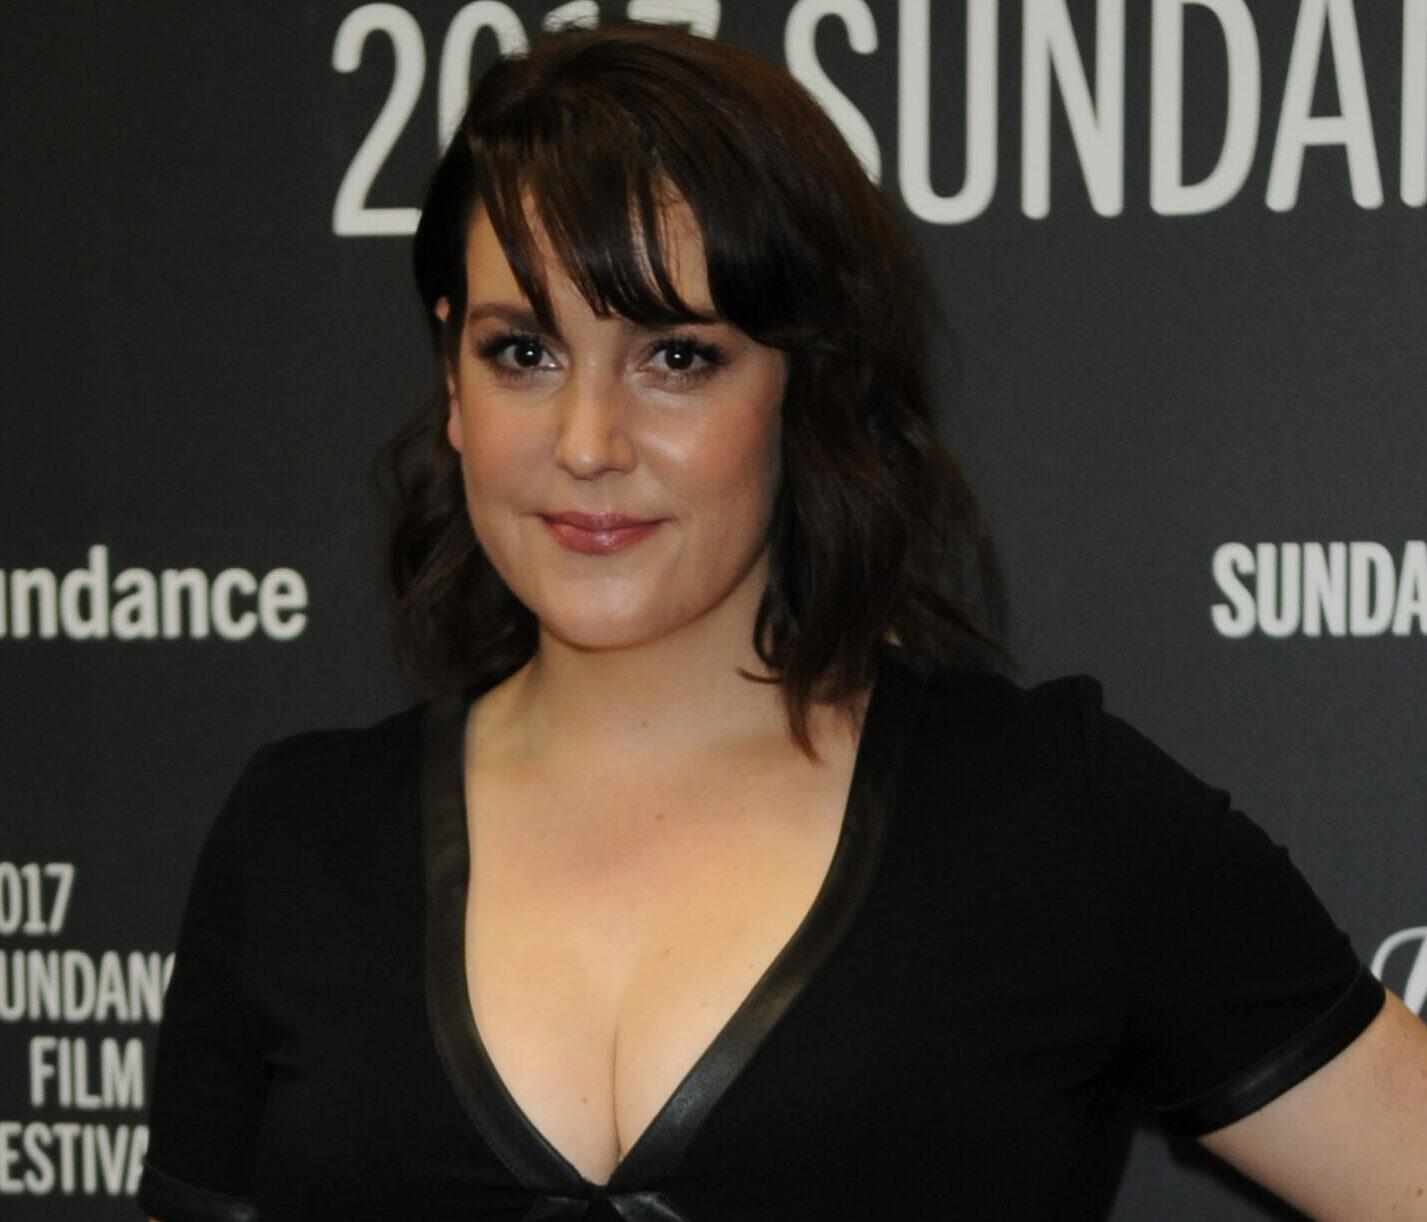 Melanie Lynskey arrives on the red carpet at Sundance 2017 for her film 'I don't feel at home in this world anymore'